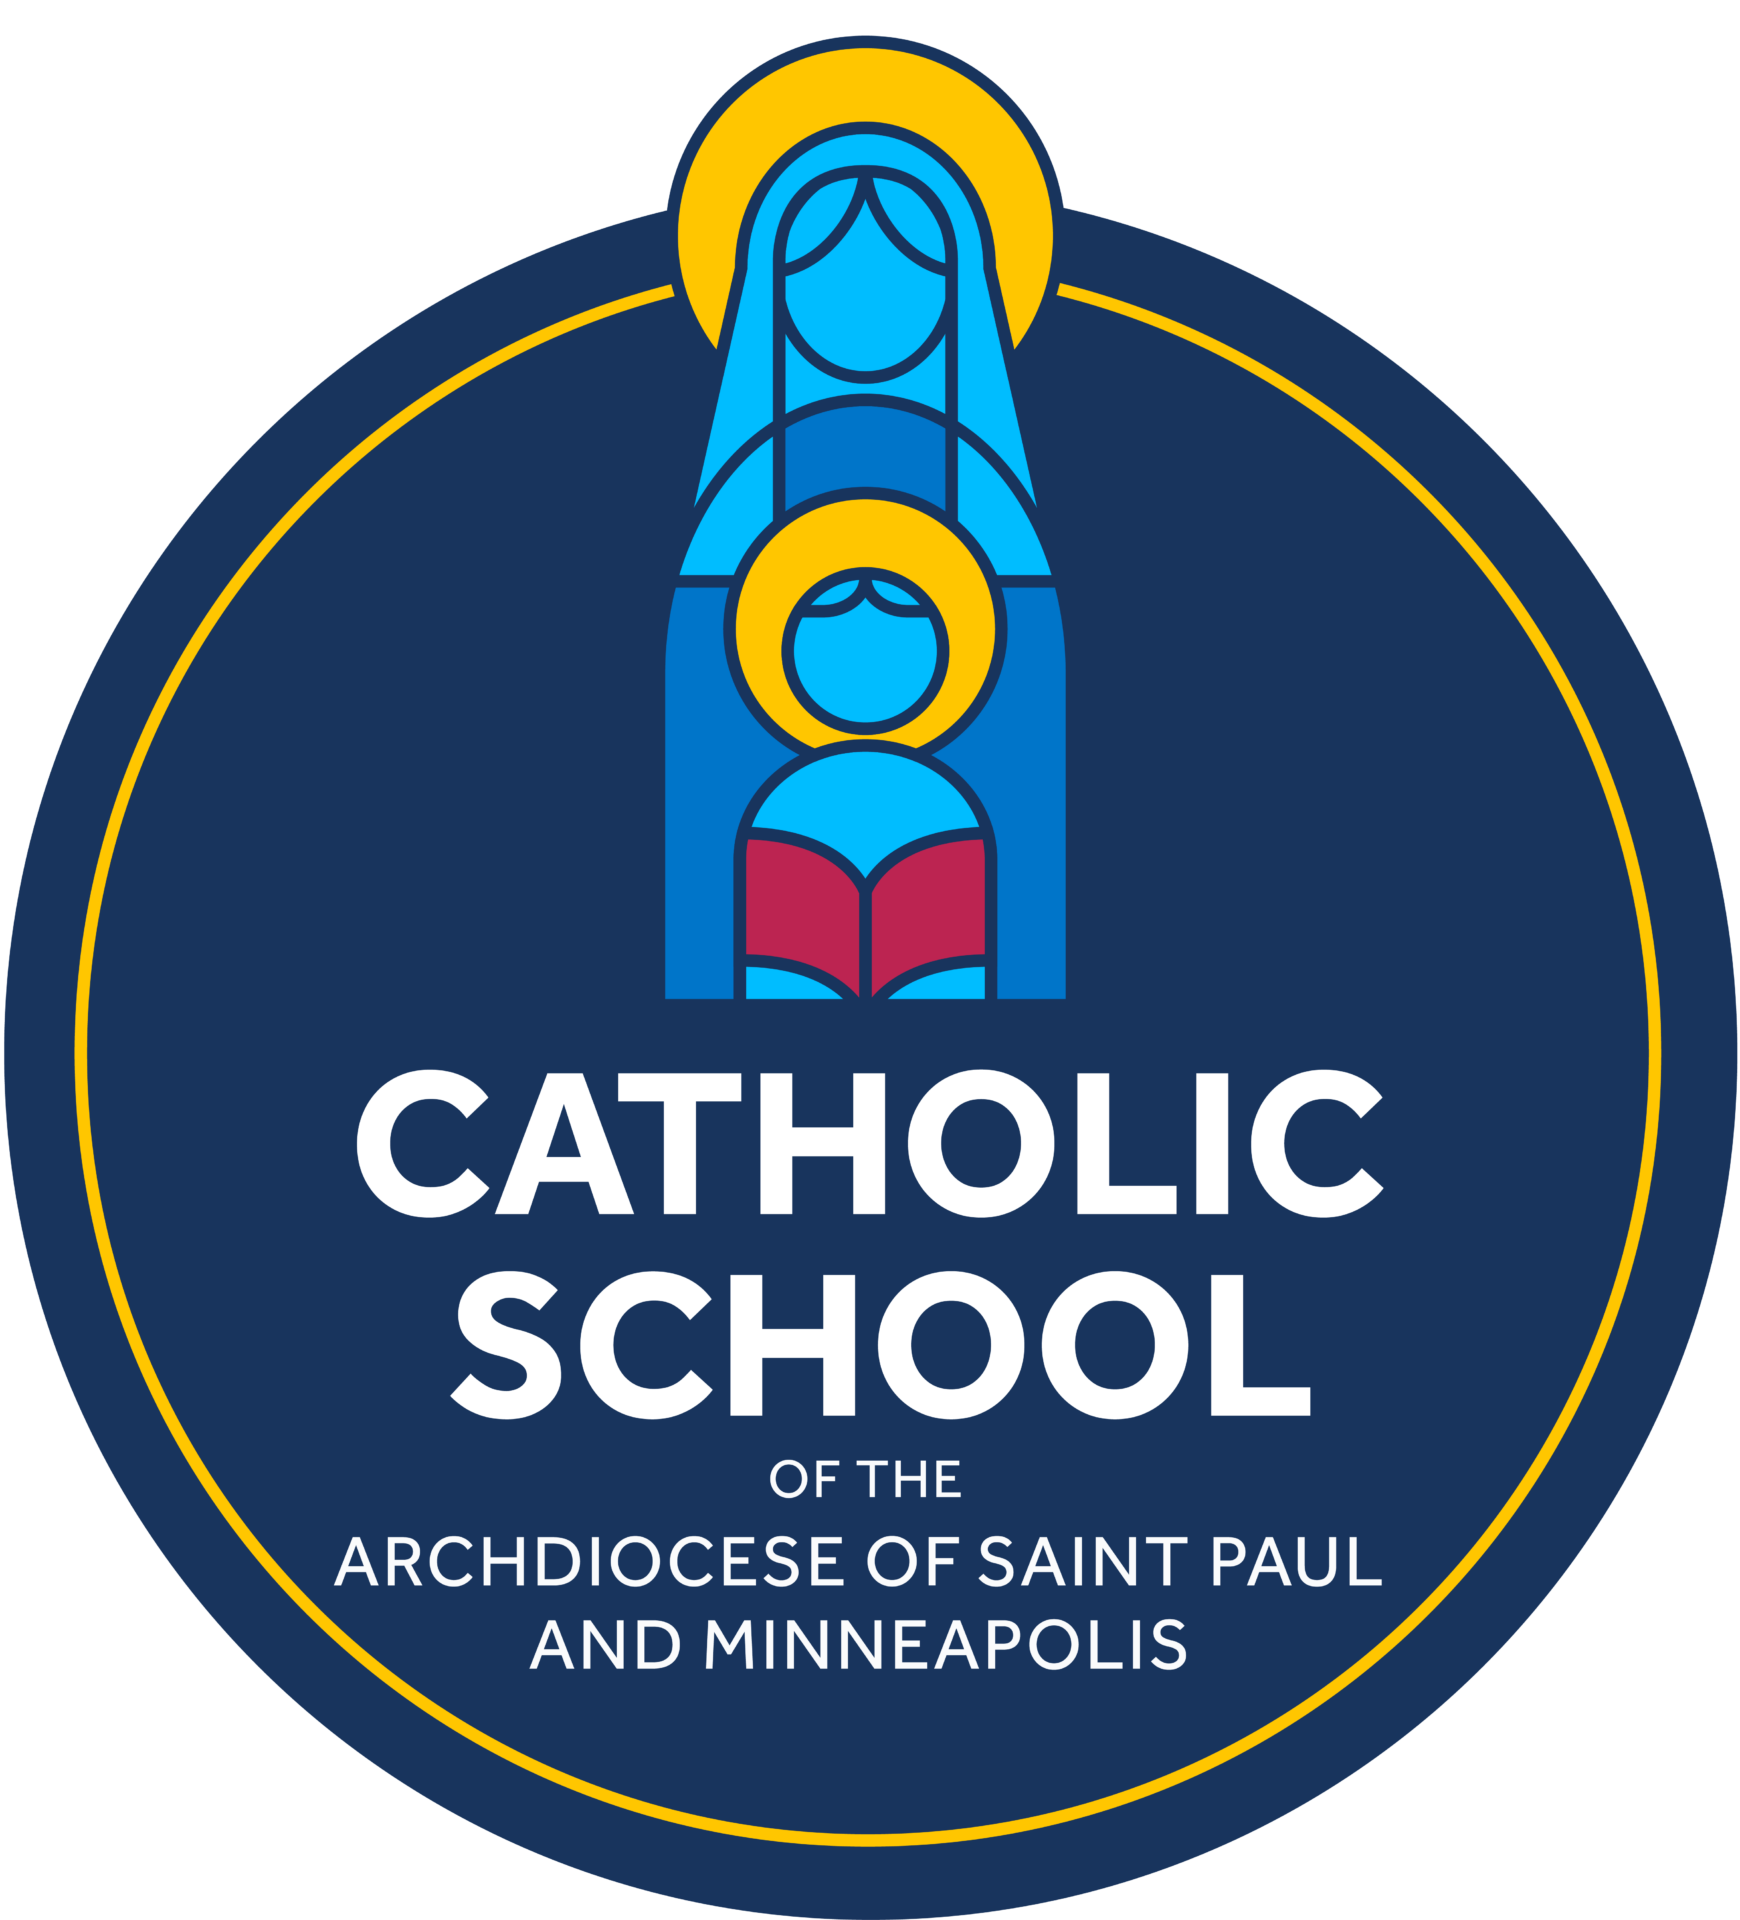 Catholic School of the Archdiocese of Saint Paul and Minneapolis